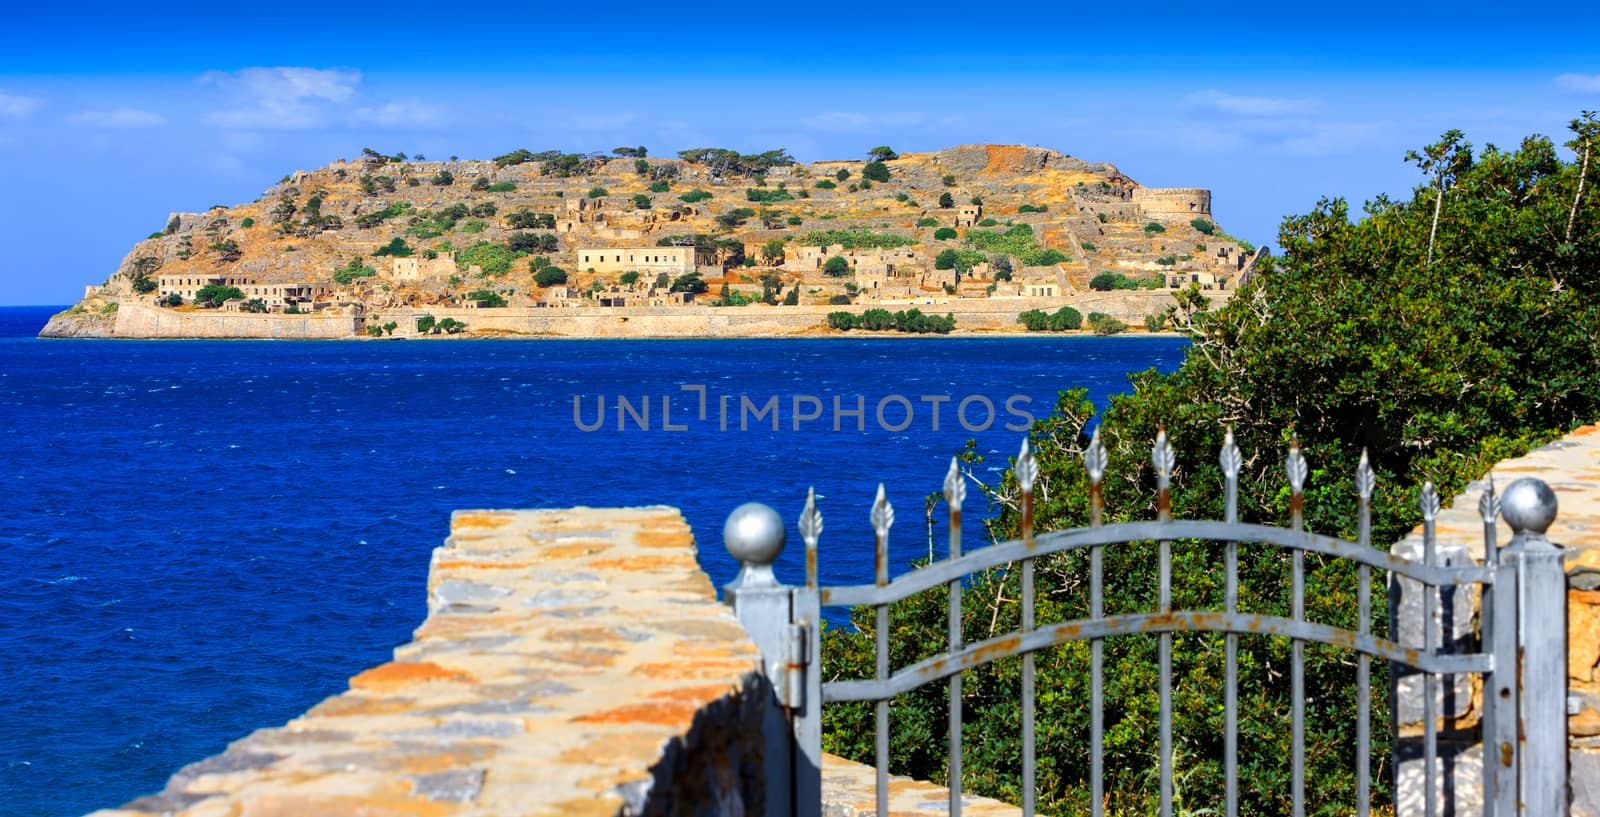 Spinalonga island, Crete, Greece. Island of Spinalonga is located at the eastern section of Crete, in Lasithi prefecture, near the town of Elounda. Mirabello Bay.
